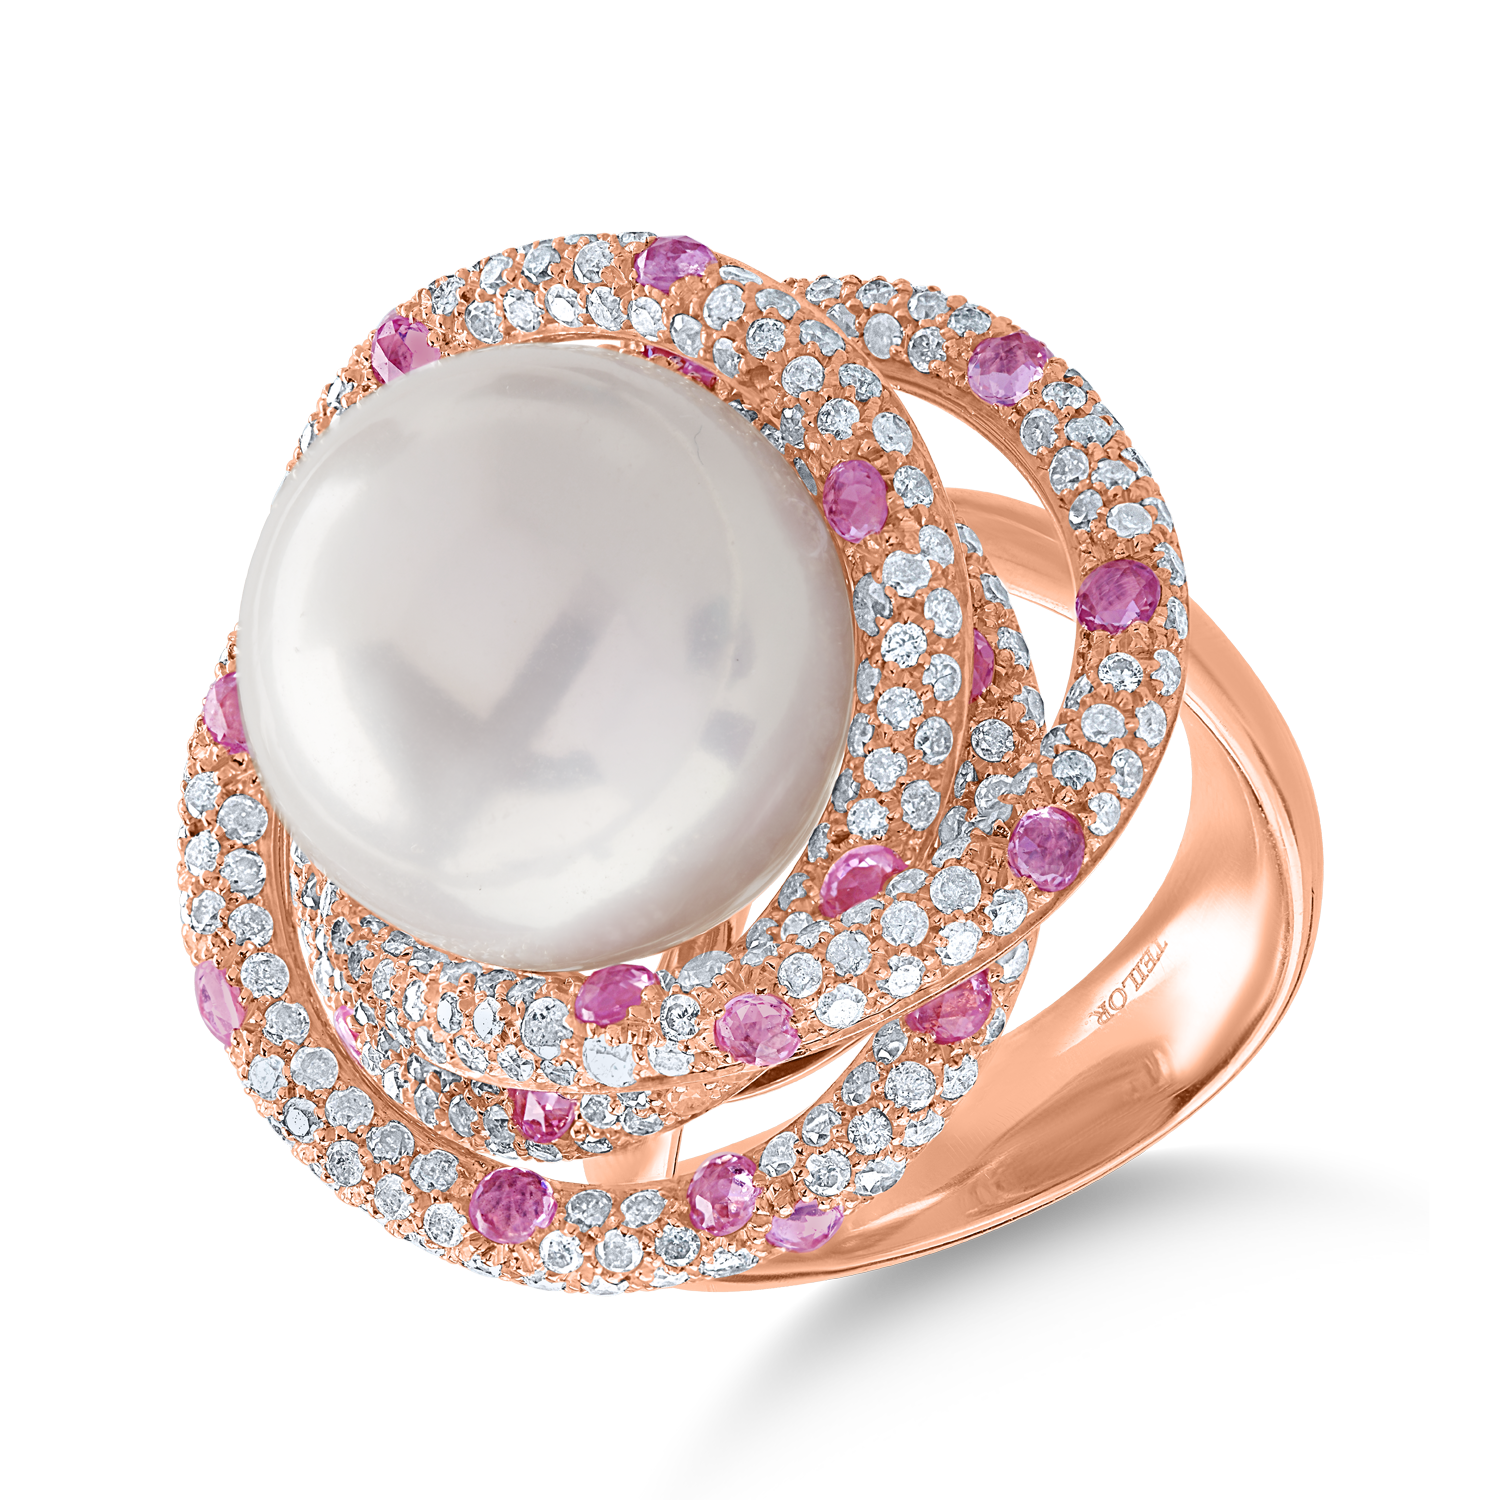 Rose gold ring with 23.3ct fresh water pearl and 3.15ct precious stones